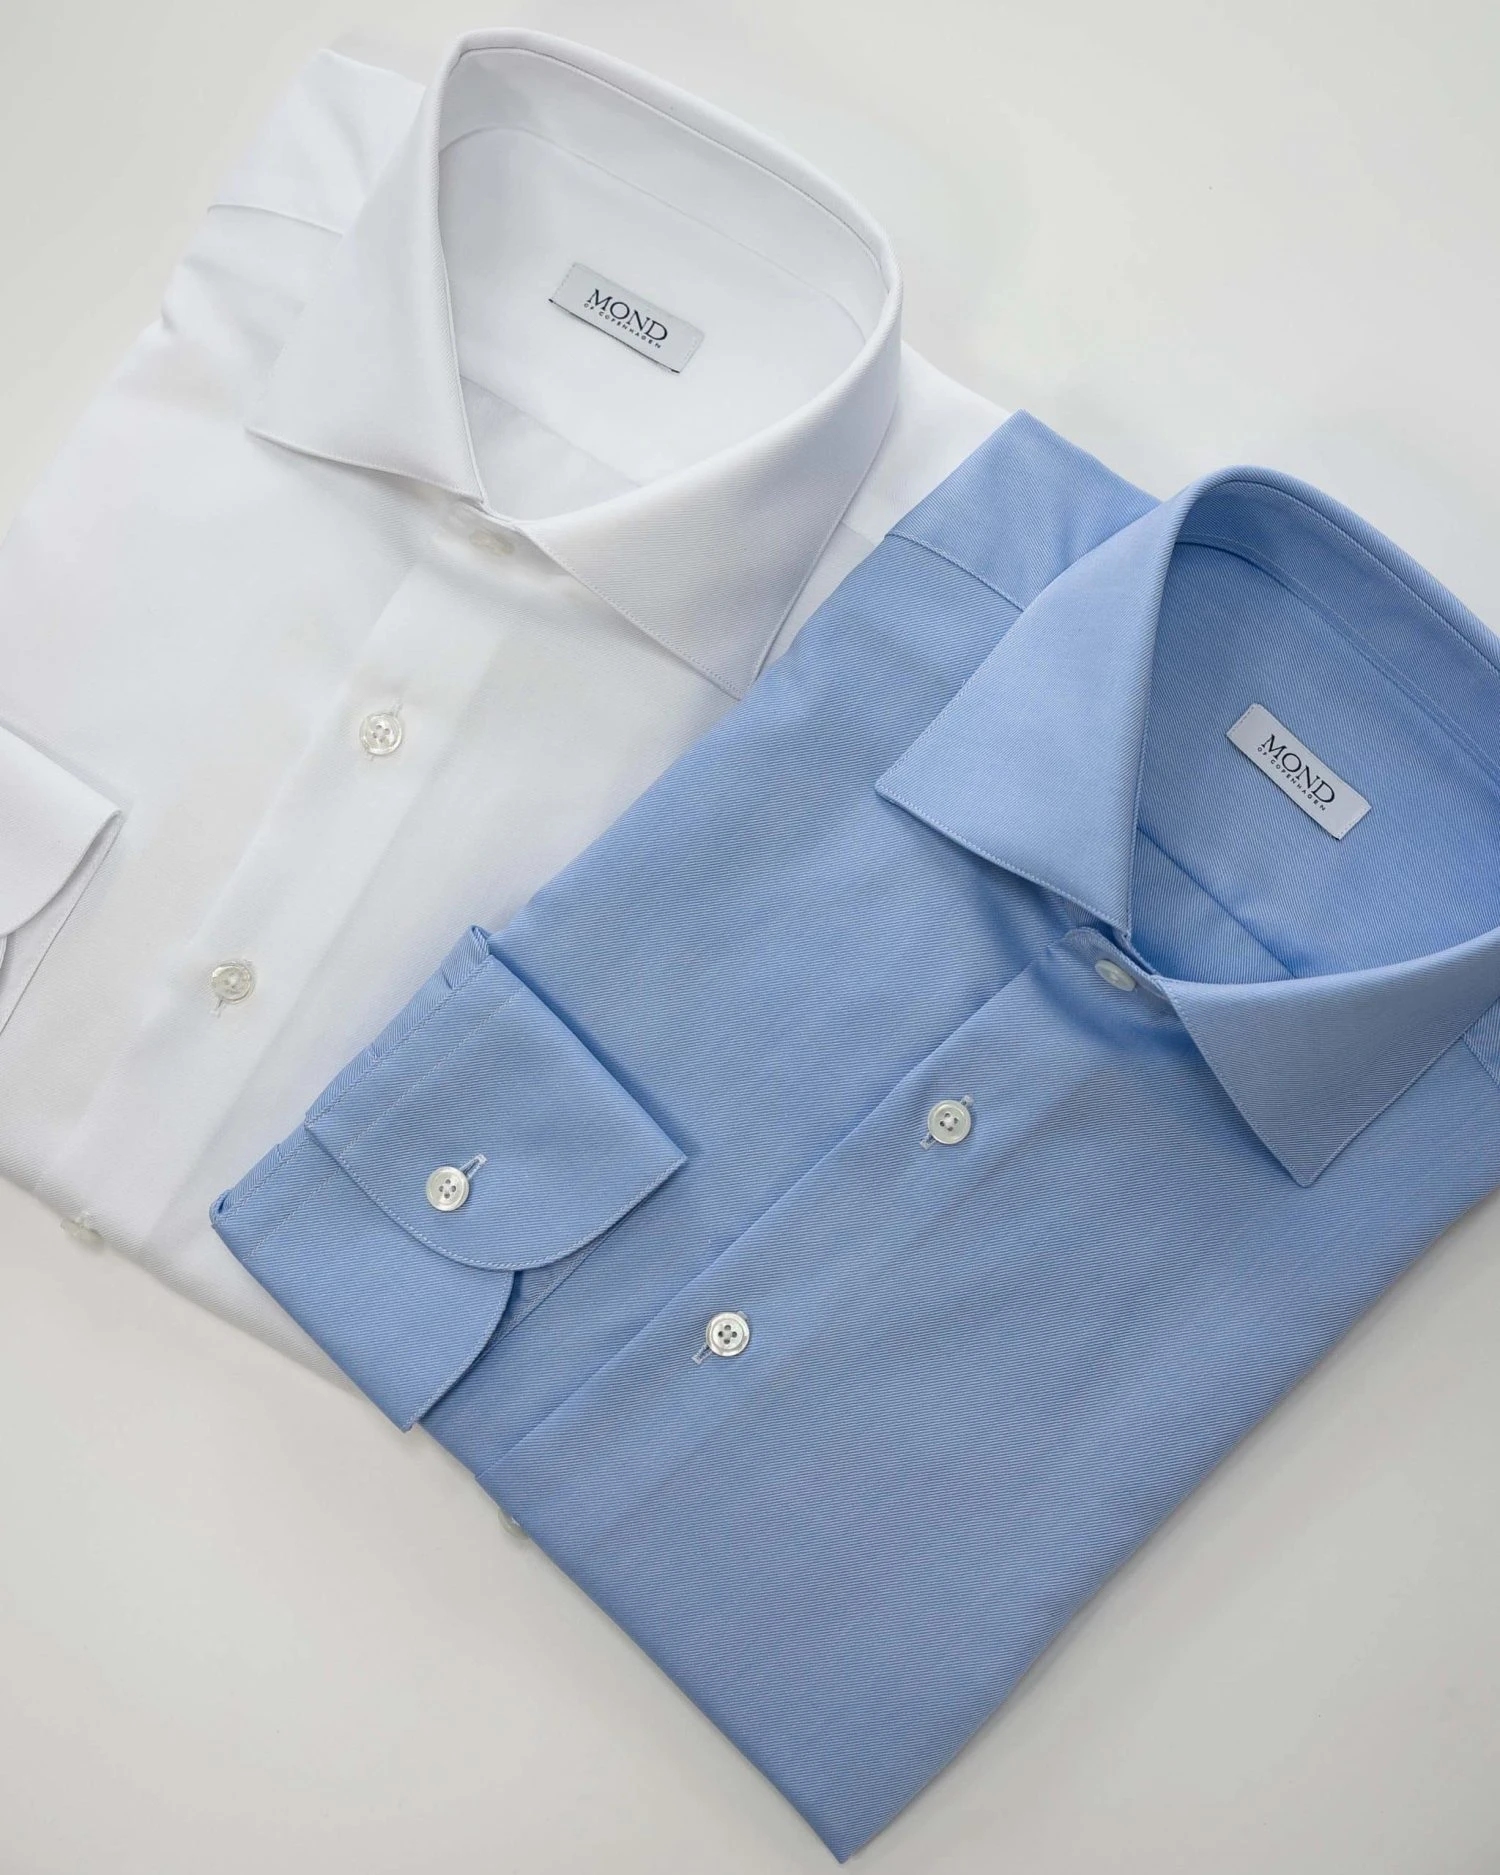 Essential Light Blue and White Easy Care shirts